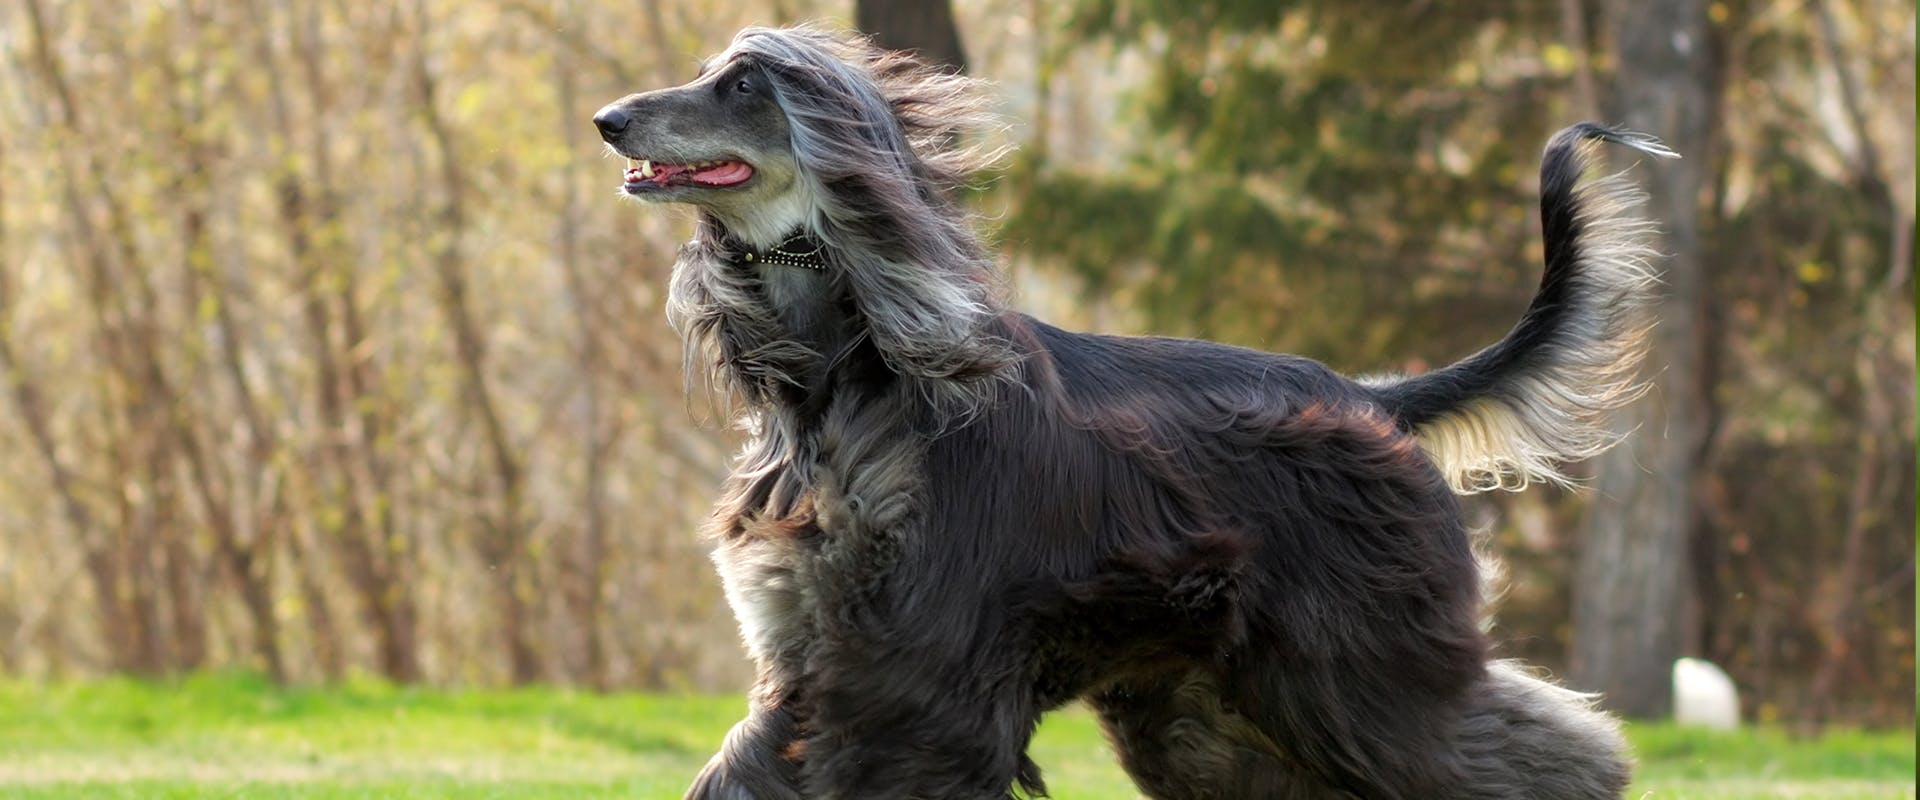 An Afghan Hound running through a park with the wind blowing in its fur